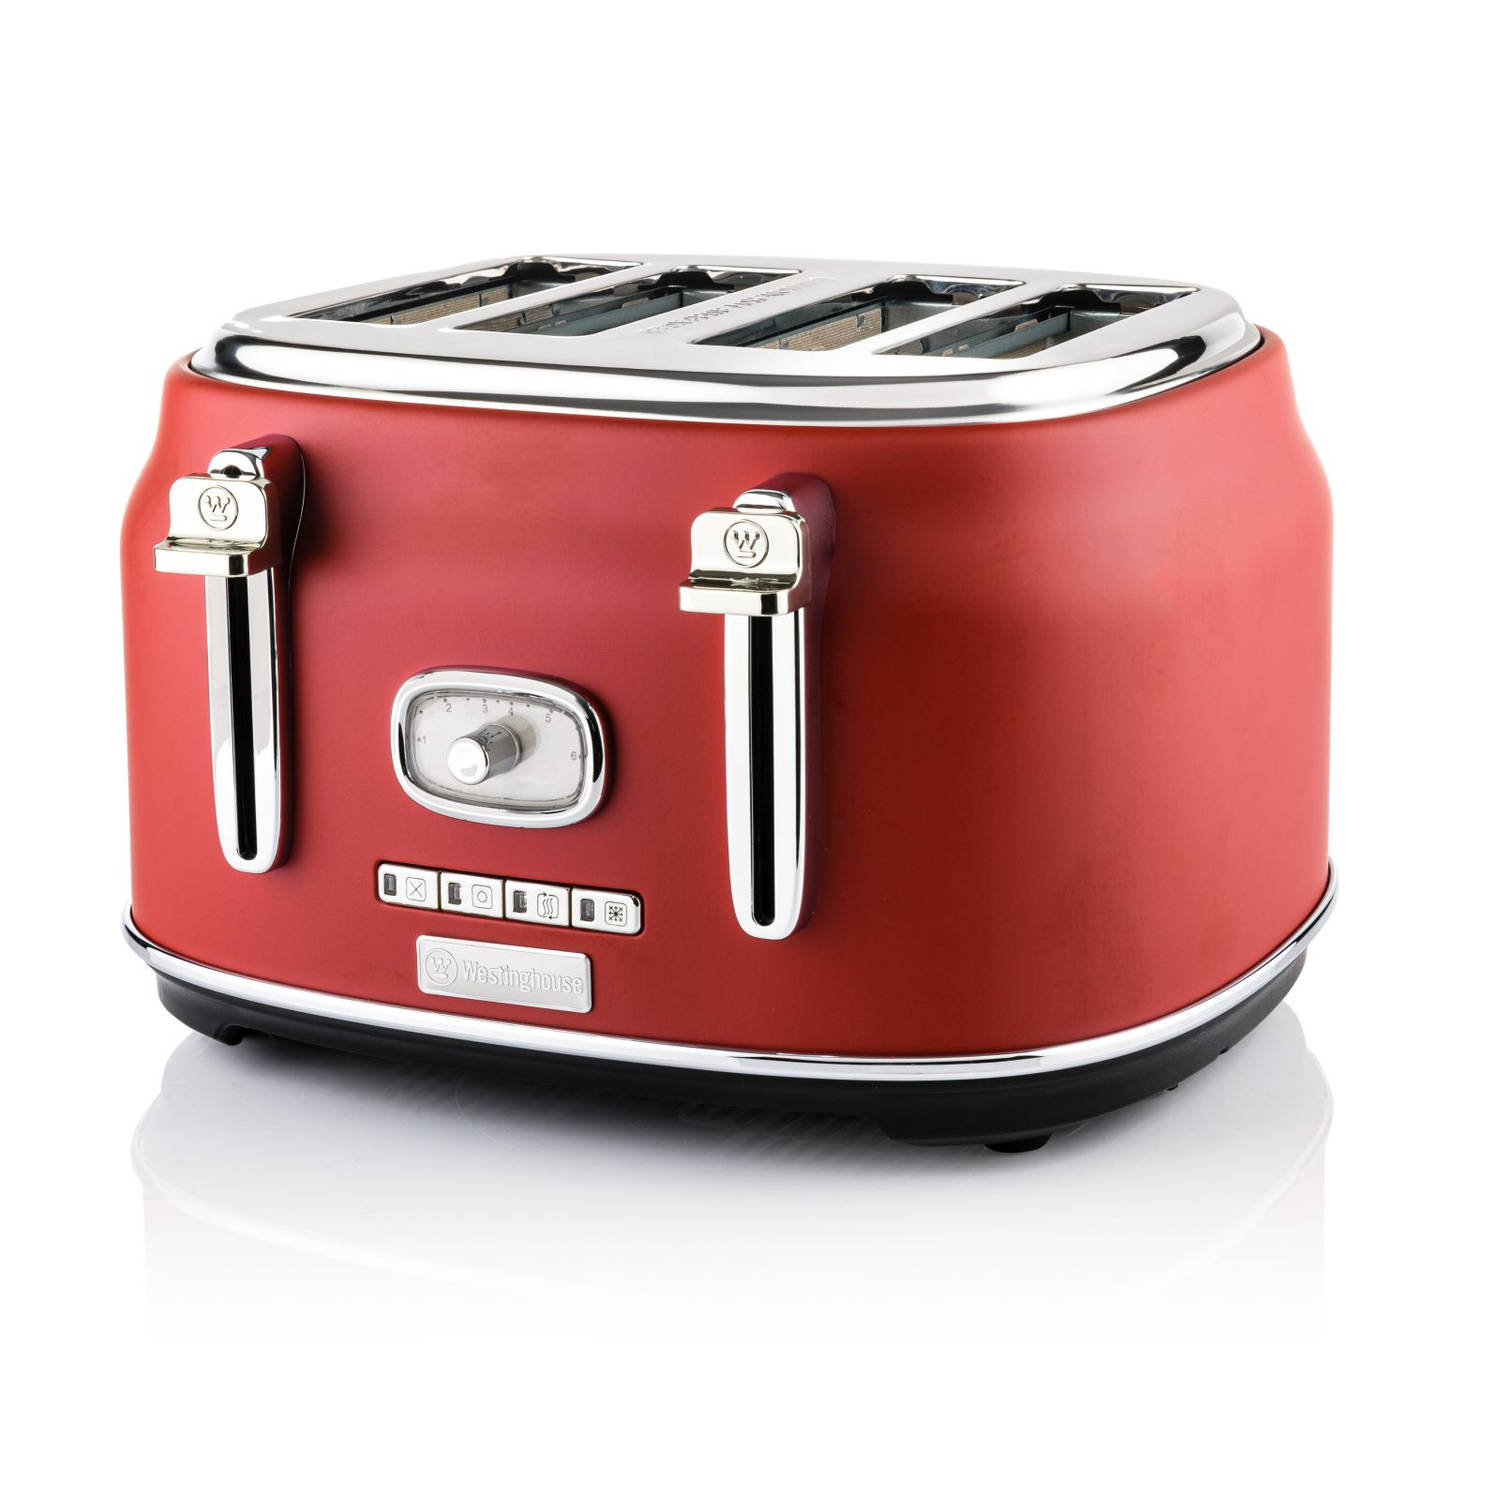 Westinghouse Retro Broodrooster 4 Slice Toaster Rood